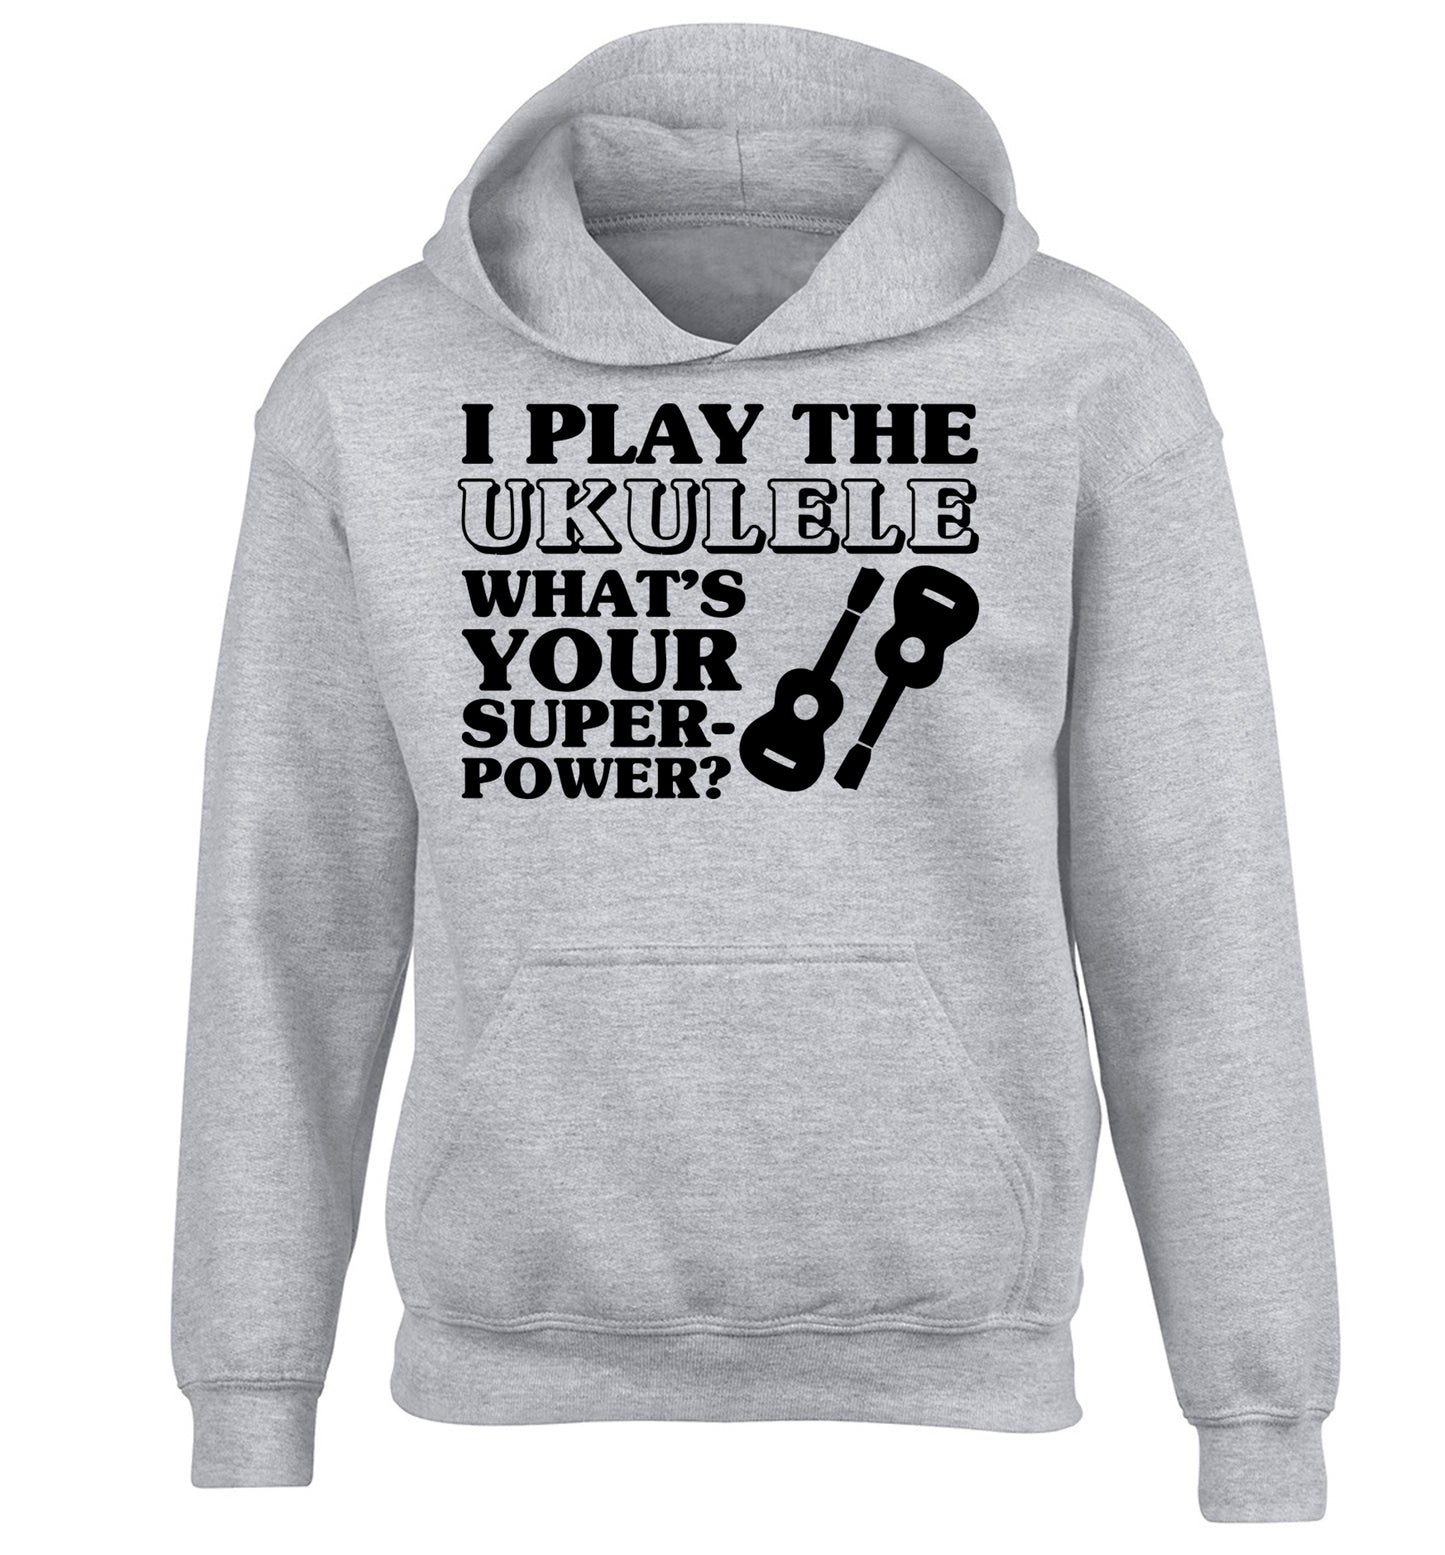 I play the ukulele what's your superpower? children's grey hoodie 12-14 Years